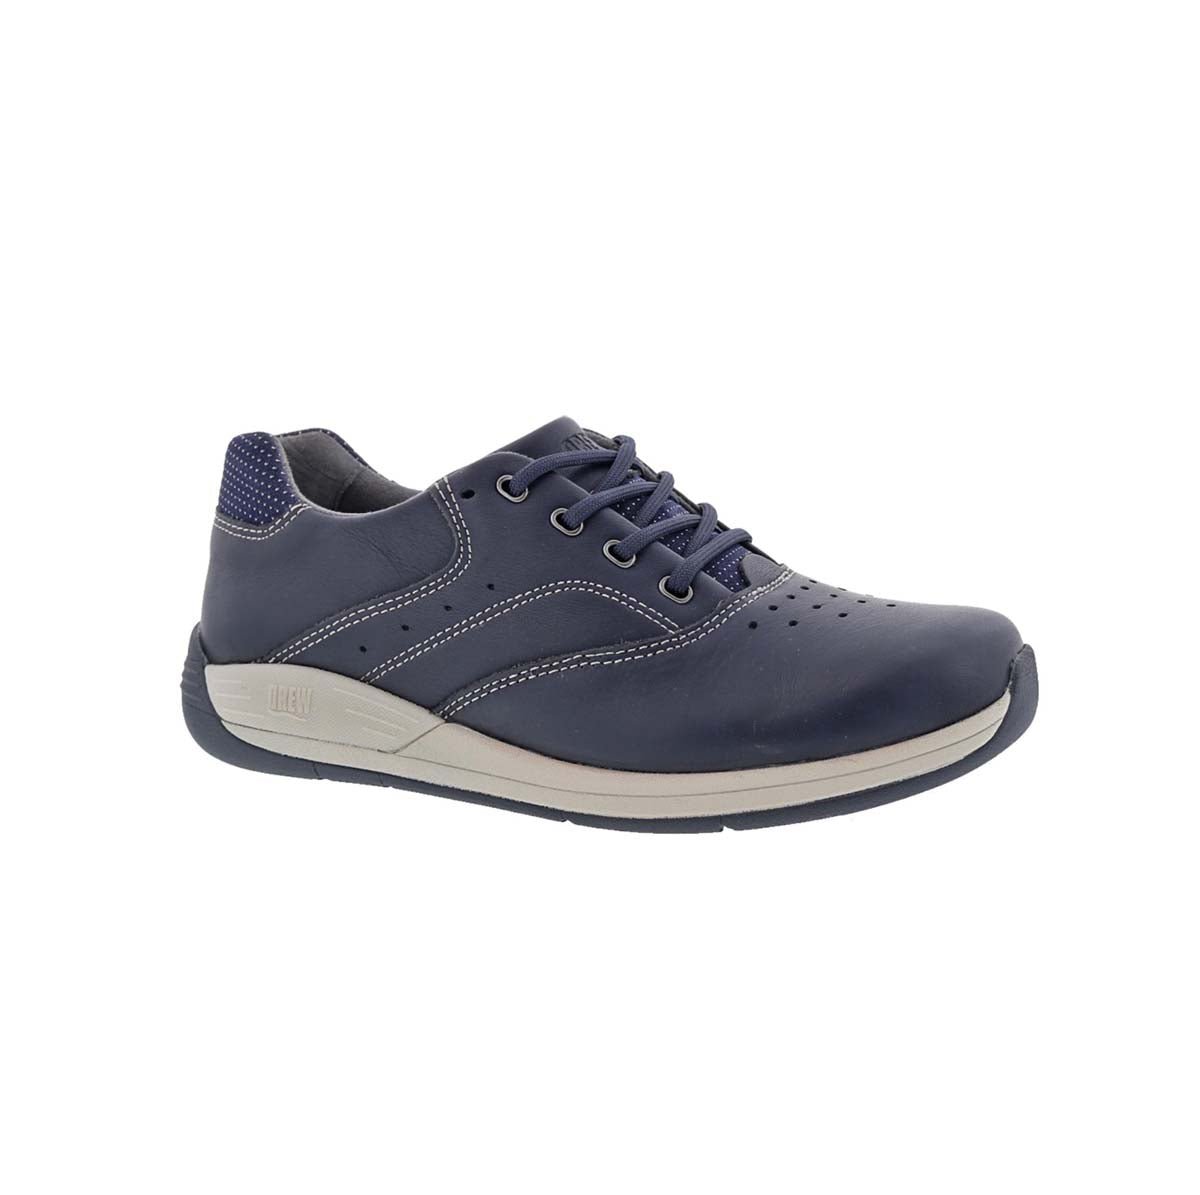 DREW TOUR WOMEN OXFORD WALKING SHOES IN NAVY LEATHER - TLW Shoes